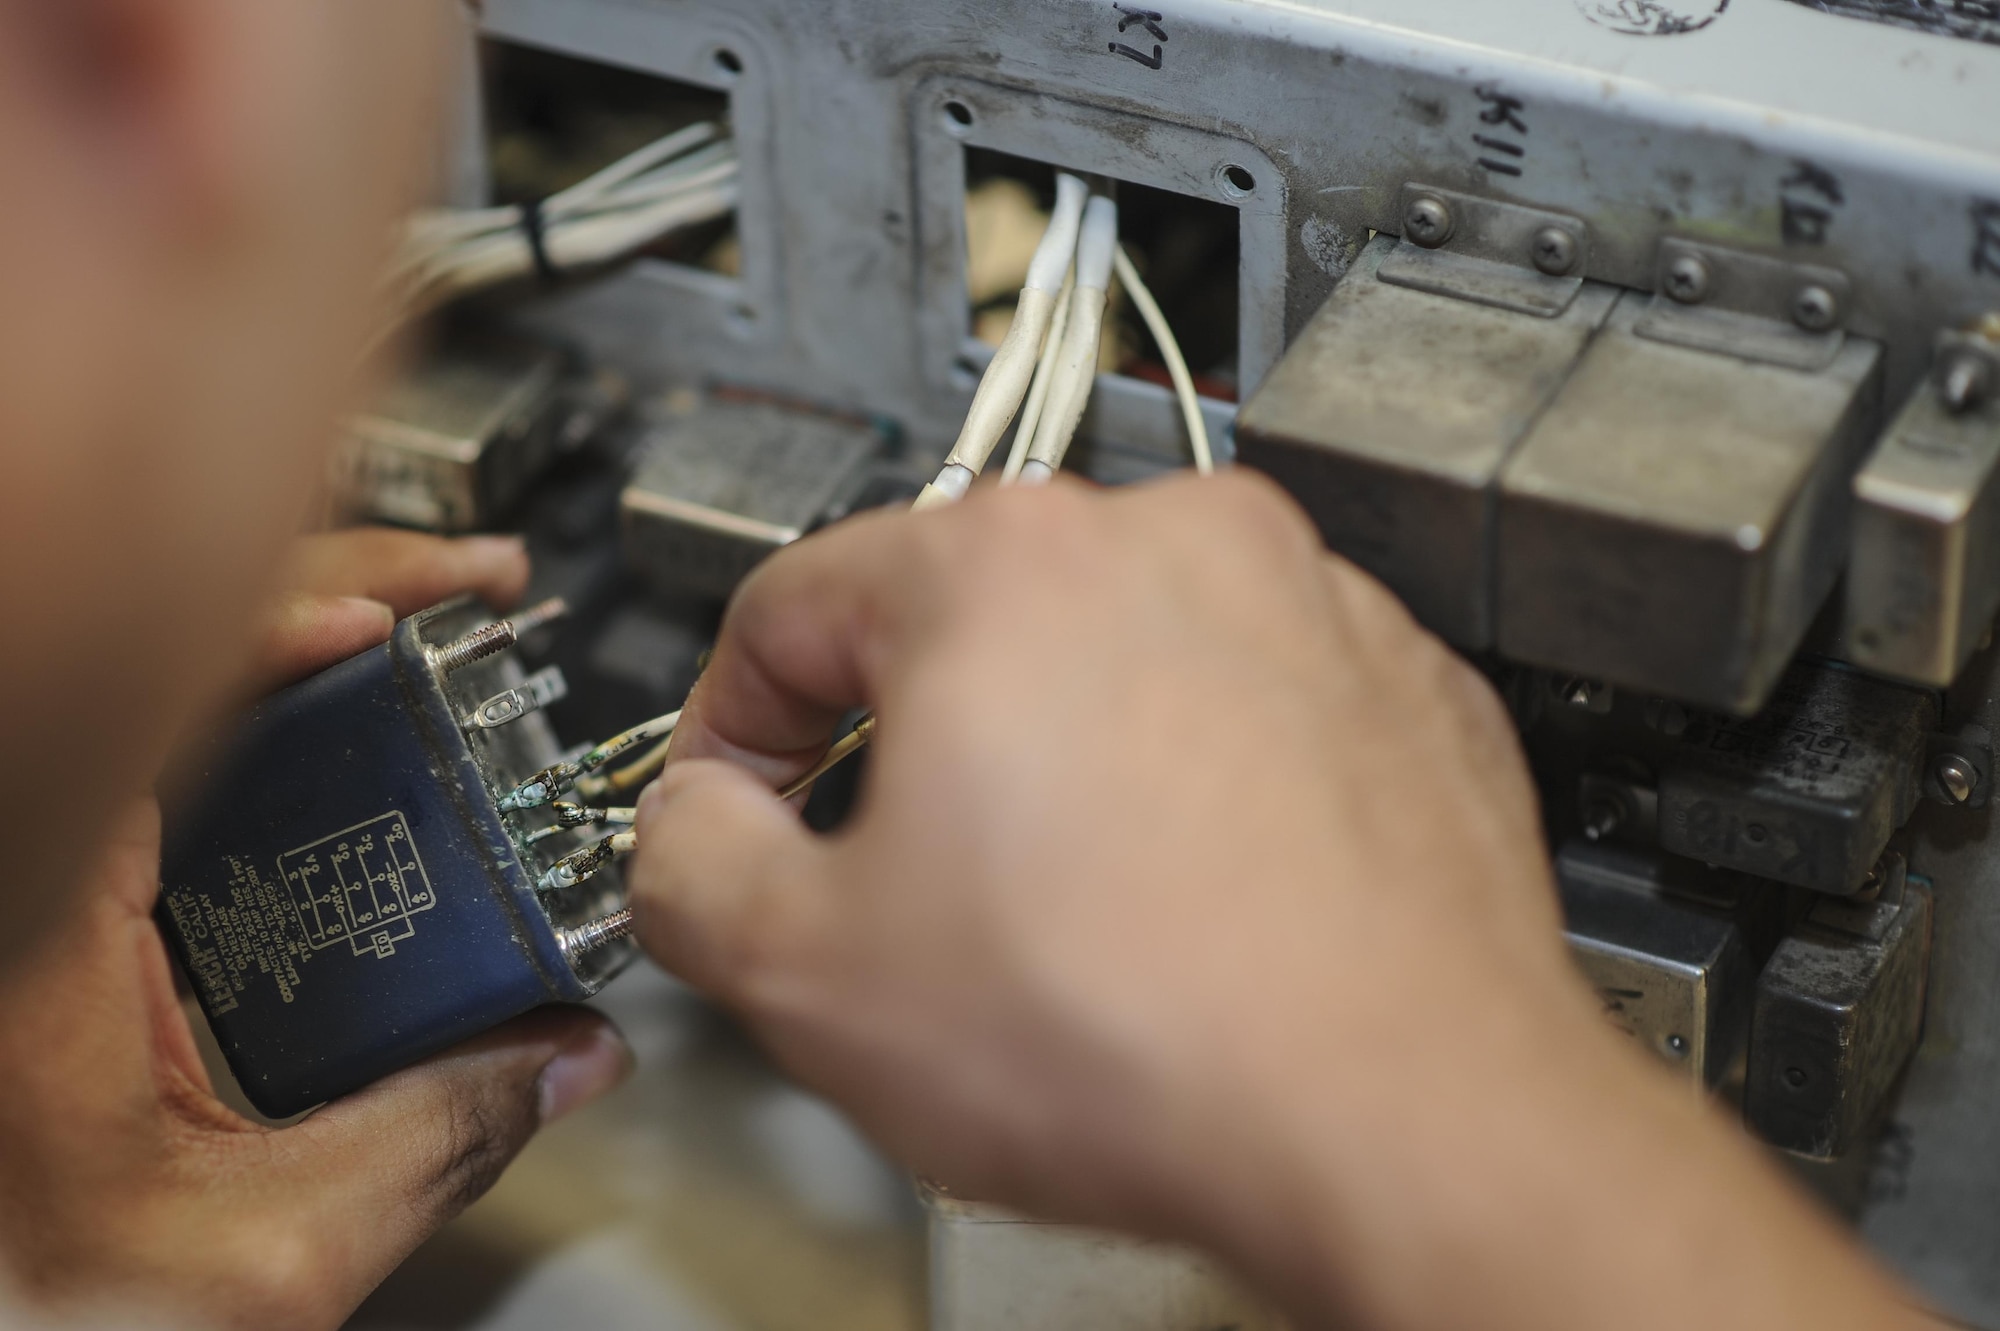 Staff Sgt. Vincent Cruz, 355th Maintenance Group Air Force repair enhancement program technician, solders a replacement relay for an armament relay box that controls some of the A-10 weapons systems at Davis-Monthan Air Force Base, Ariz., Oct. 25, 2016. AFREP is not intended to replace any formal repair process but to enhance localized repair capability. (U.S. Air Force photo by Airman 1st Class Mya M. Crosby)